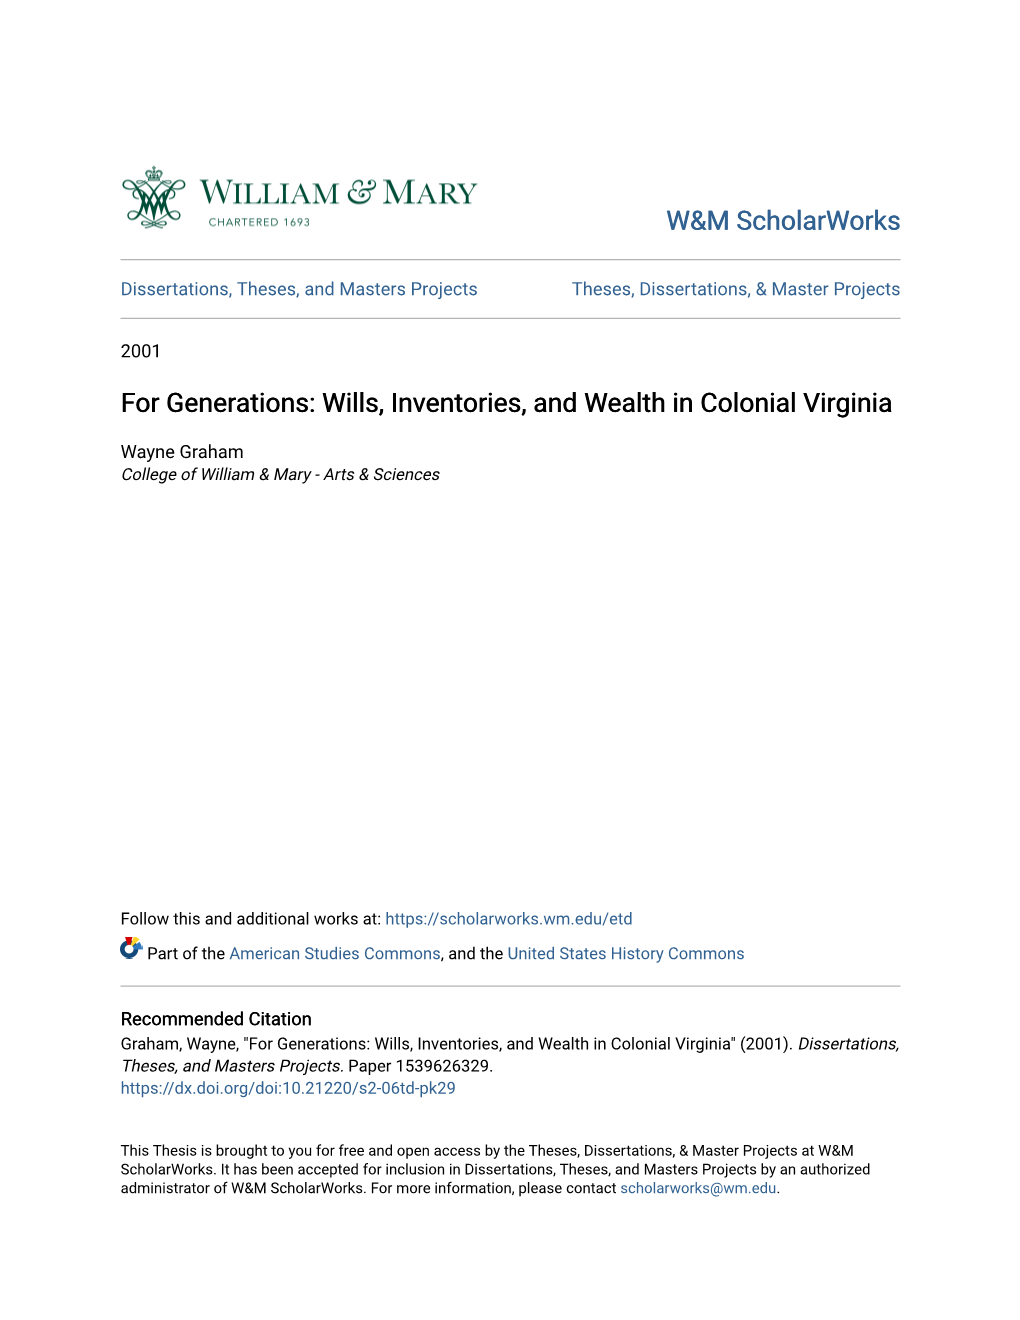 For Generations: Wills, Inventories, and Wealth in Colonial Virginia